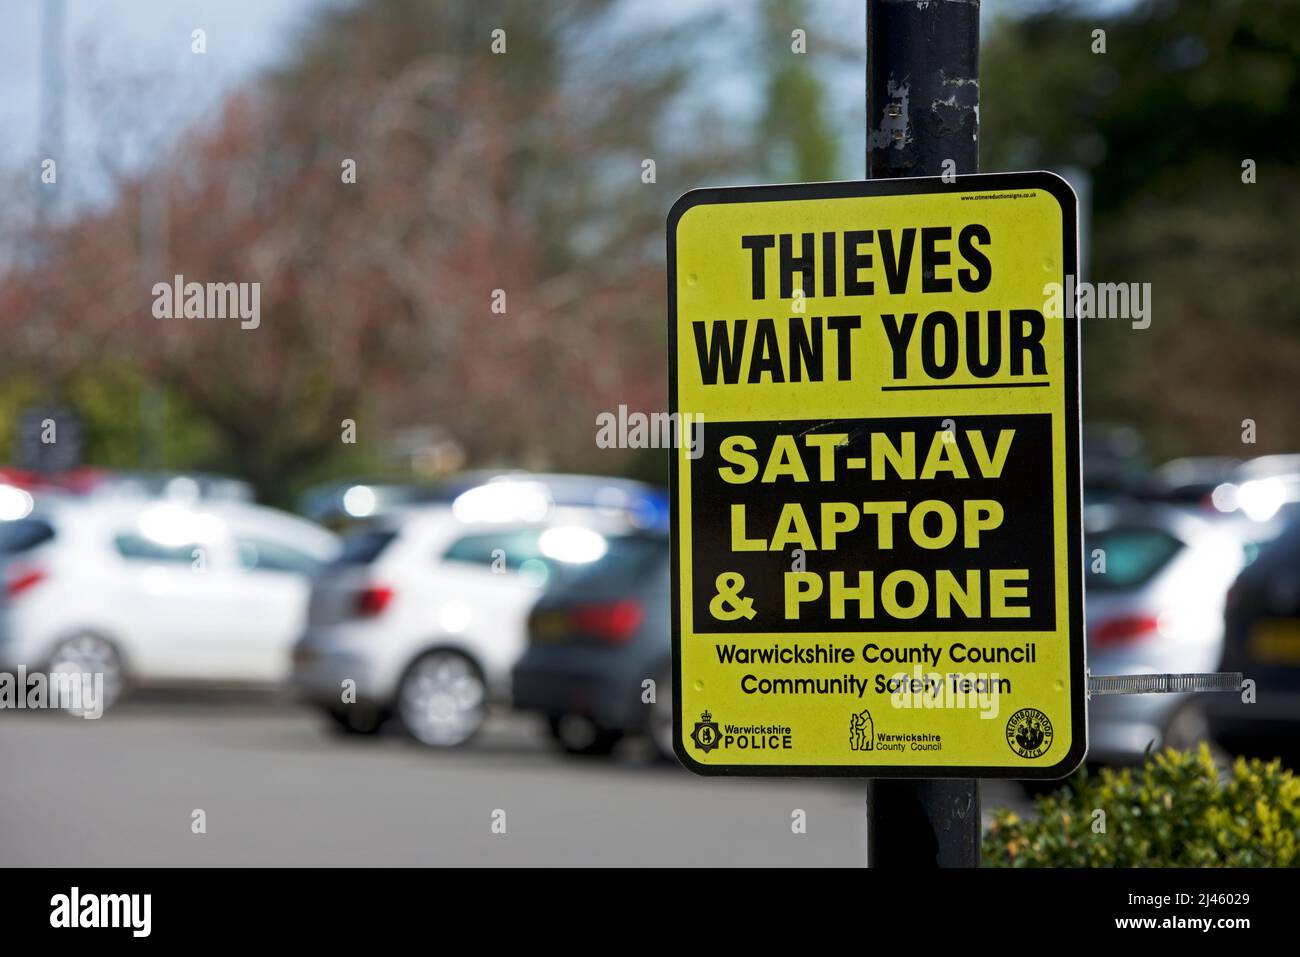 Sign at entrance to car park, warning motorists that thieves want your sat-nav, laptop and phone, England UK Stock Photo